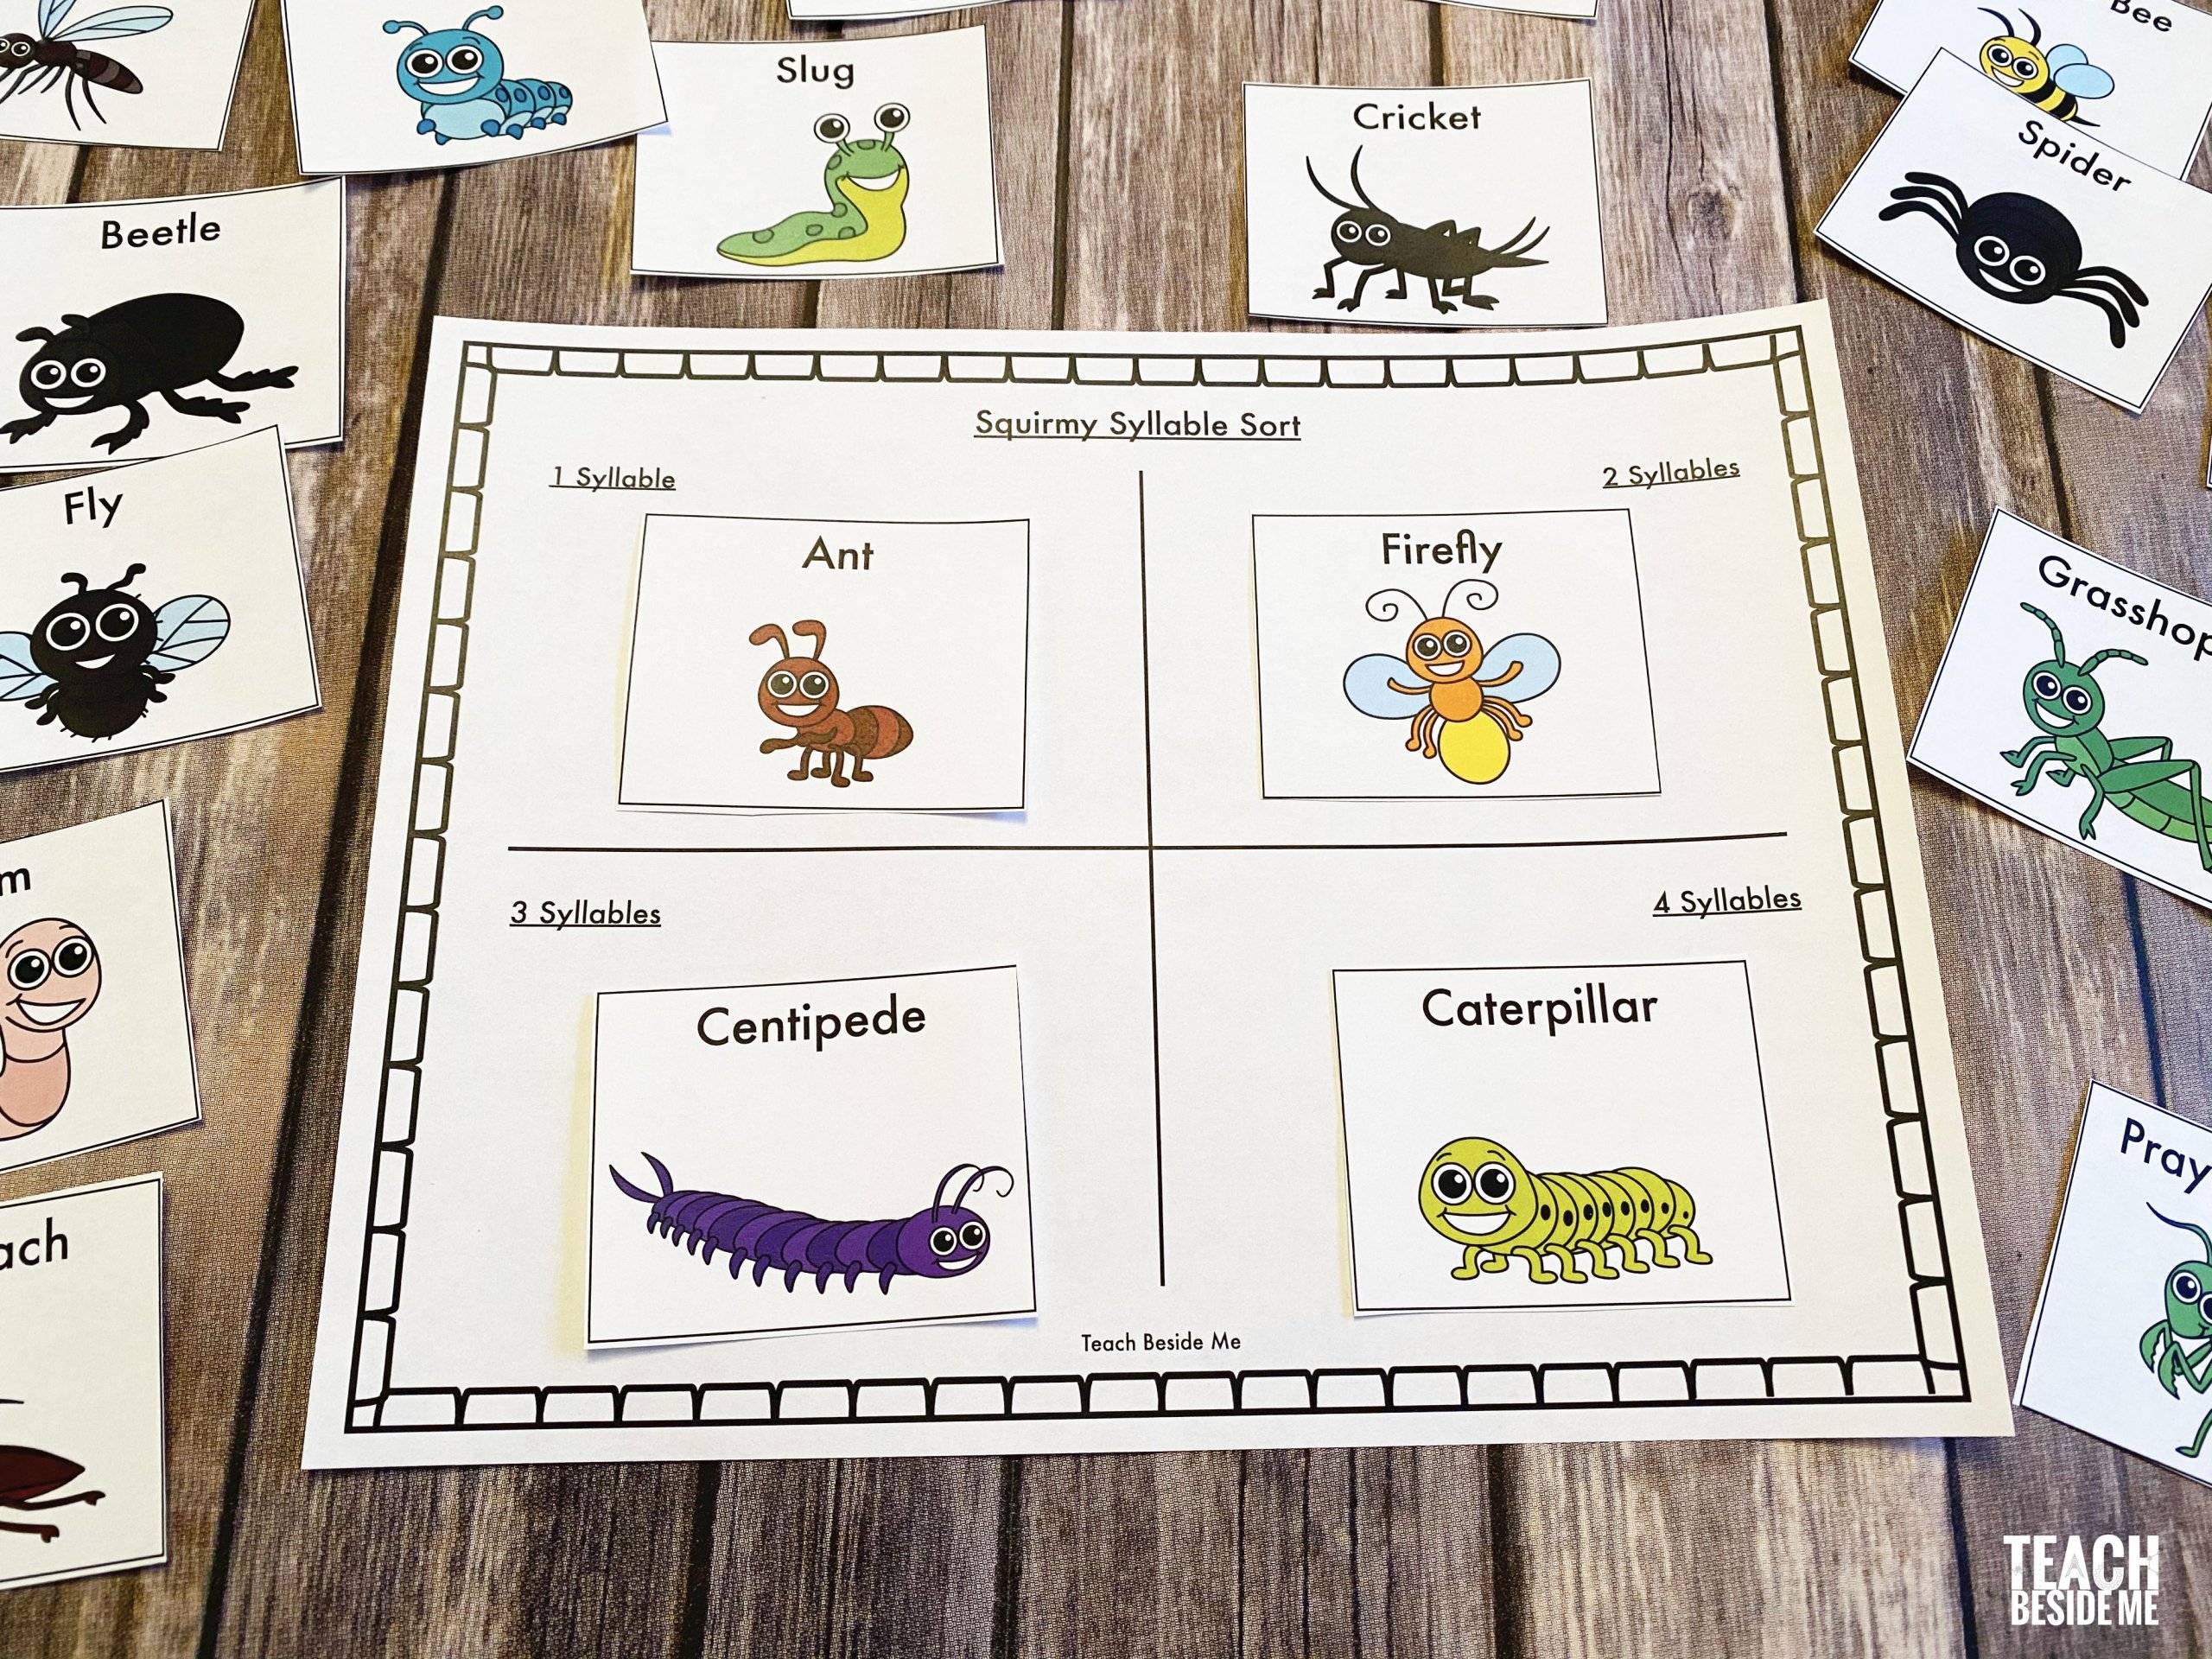 Squirmy Syllable Words Sort with Insects - Teach Beside Me